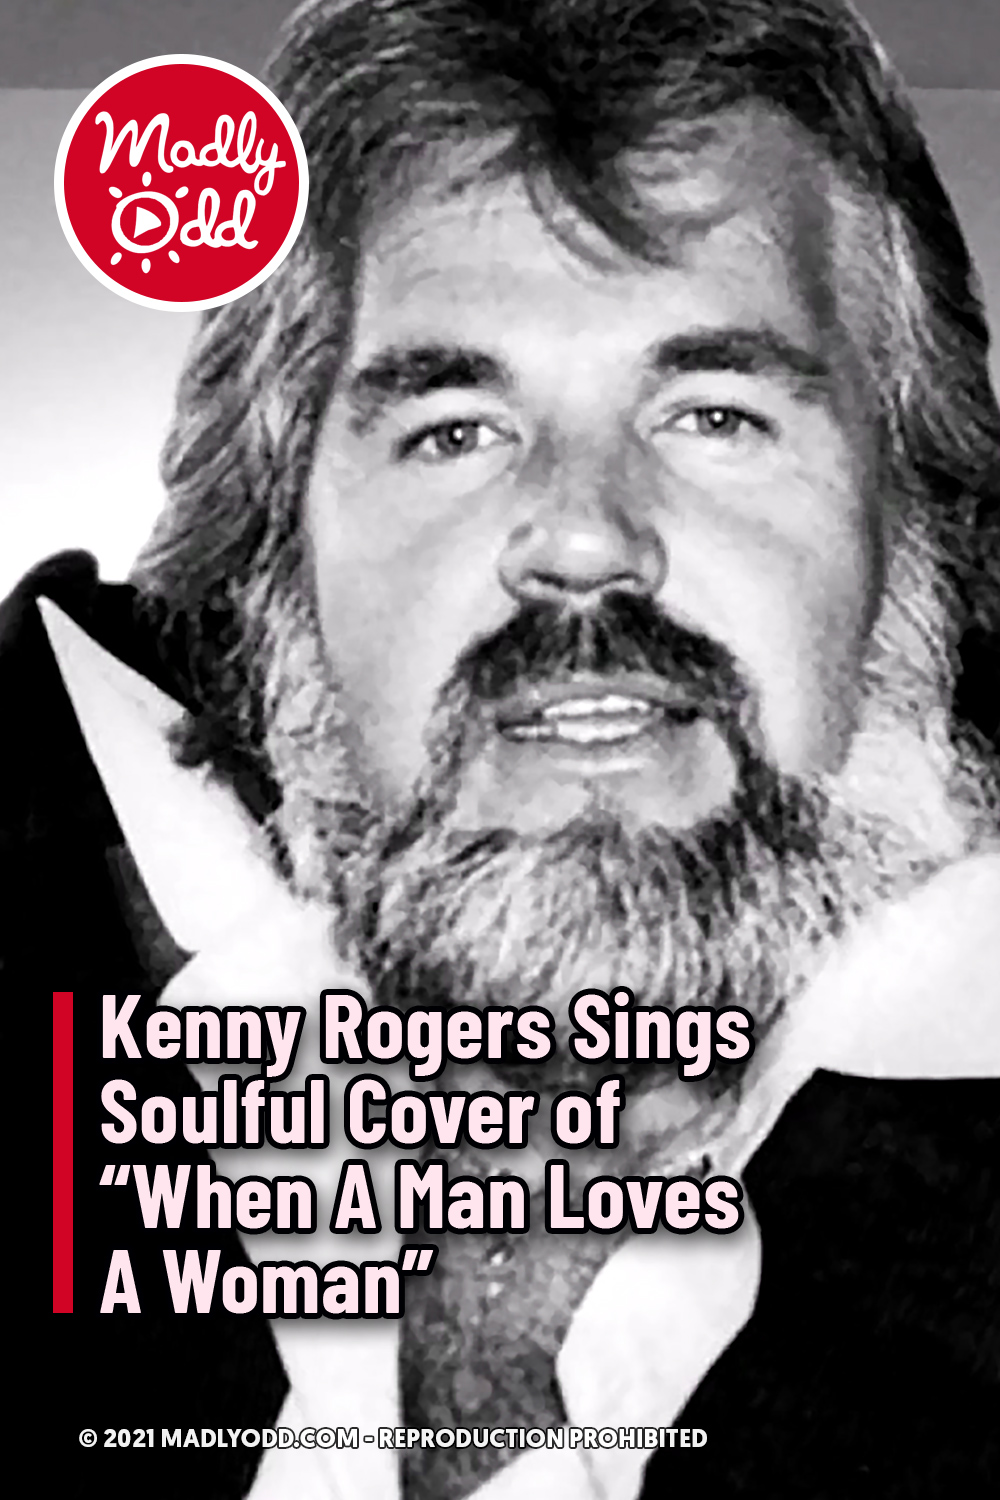 Kenny Rogers Sings Soulful Cover of “When A Man Loves A Woman”